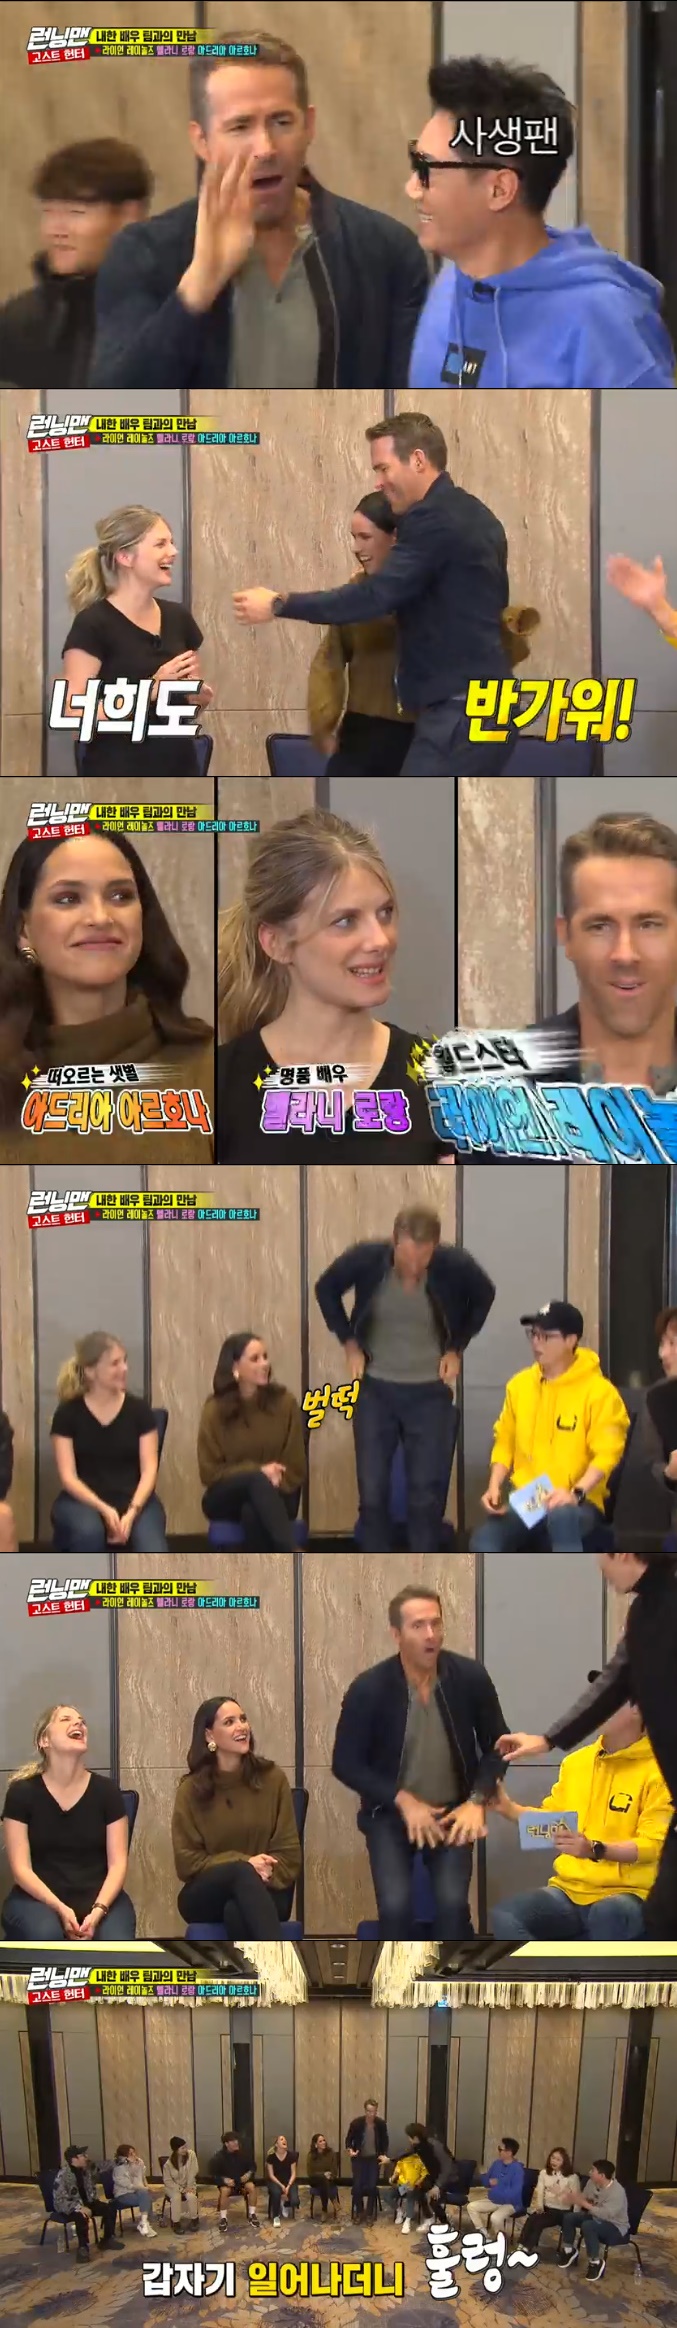 Hollywood actors Lion Laynolds, Melanie Laurent and Adriatic Arhona made a surprise snap at Running ManIn the SBS entertainment program Running Man broadcasted on the afternoon of the 22nd, Lion Laynolds, Melanie Laurent and Adriatic Arhona, the performers of Netflix movie 6 Underground, appeared as guests.On this day, Lion Laynolds, Melanie Laurent and Adria Arhona made a team member by looking at only the photos of Running Man members.Lion greeted the Running Man members with 6 Underground and high tension, and shouted Wow from the first word.Im glad to be out like this, Im looking forward to being the first victim here, Lion said, while Adria Arhona whistled, Thank you for inviting me.Melanie Laurent also thanked the invitation.In the progression of Yoo Jae-Suk, Lion looked into the cue card and suddenly got up and took off his pants and said, Im sorry.I must have read the cue card wrong, he said, making the scene atmosphere laugh. He showed off his behavior by eating the hand heart sent by Yoo Jae-Suk and Haha.Yoo Jae-Suk said, I visited Korea for the second time, but when I had a bottle of shochu before, I said I would shoot a bottle of shochu.After that, I can rest for a day with a bonus. Yoo Jae-suk admired Mr. Lion is good at talking. Later, Lion Laynolds said to Adria Arhona, I will show you BTS Tattoo, and he said, There is EXO Tattoo on his back and put everyone in the sea of ​​laugh.